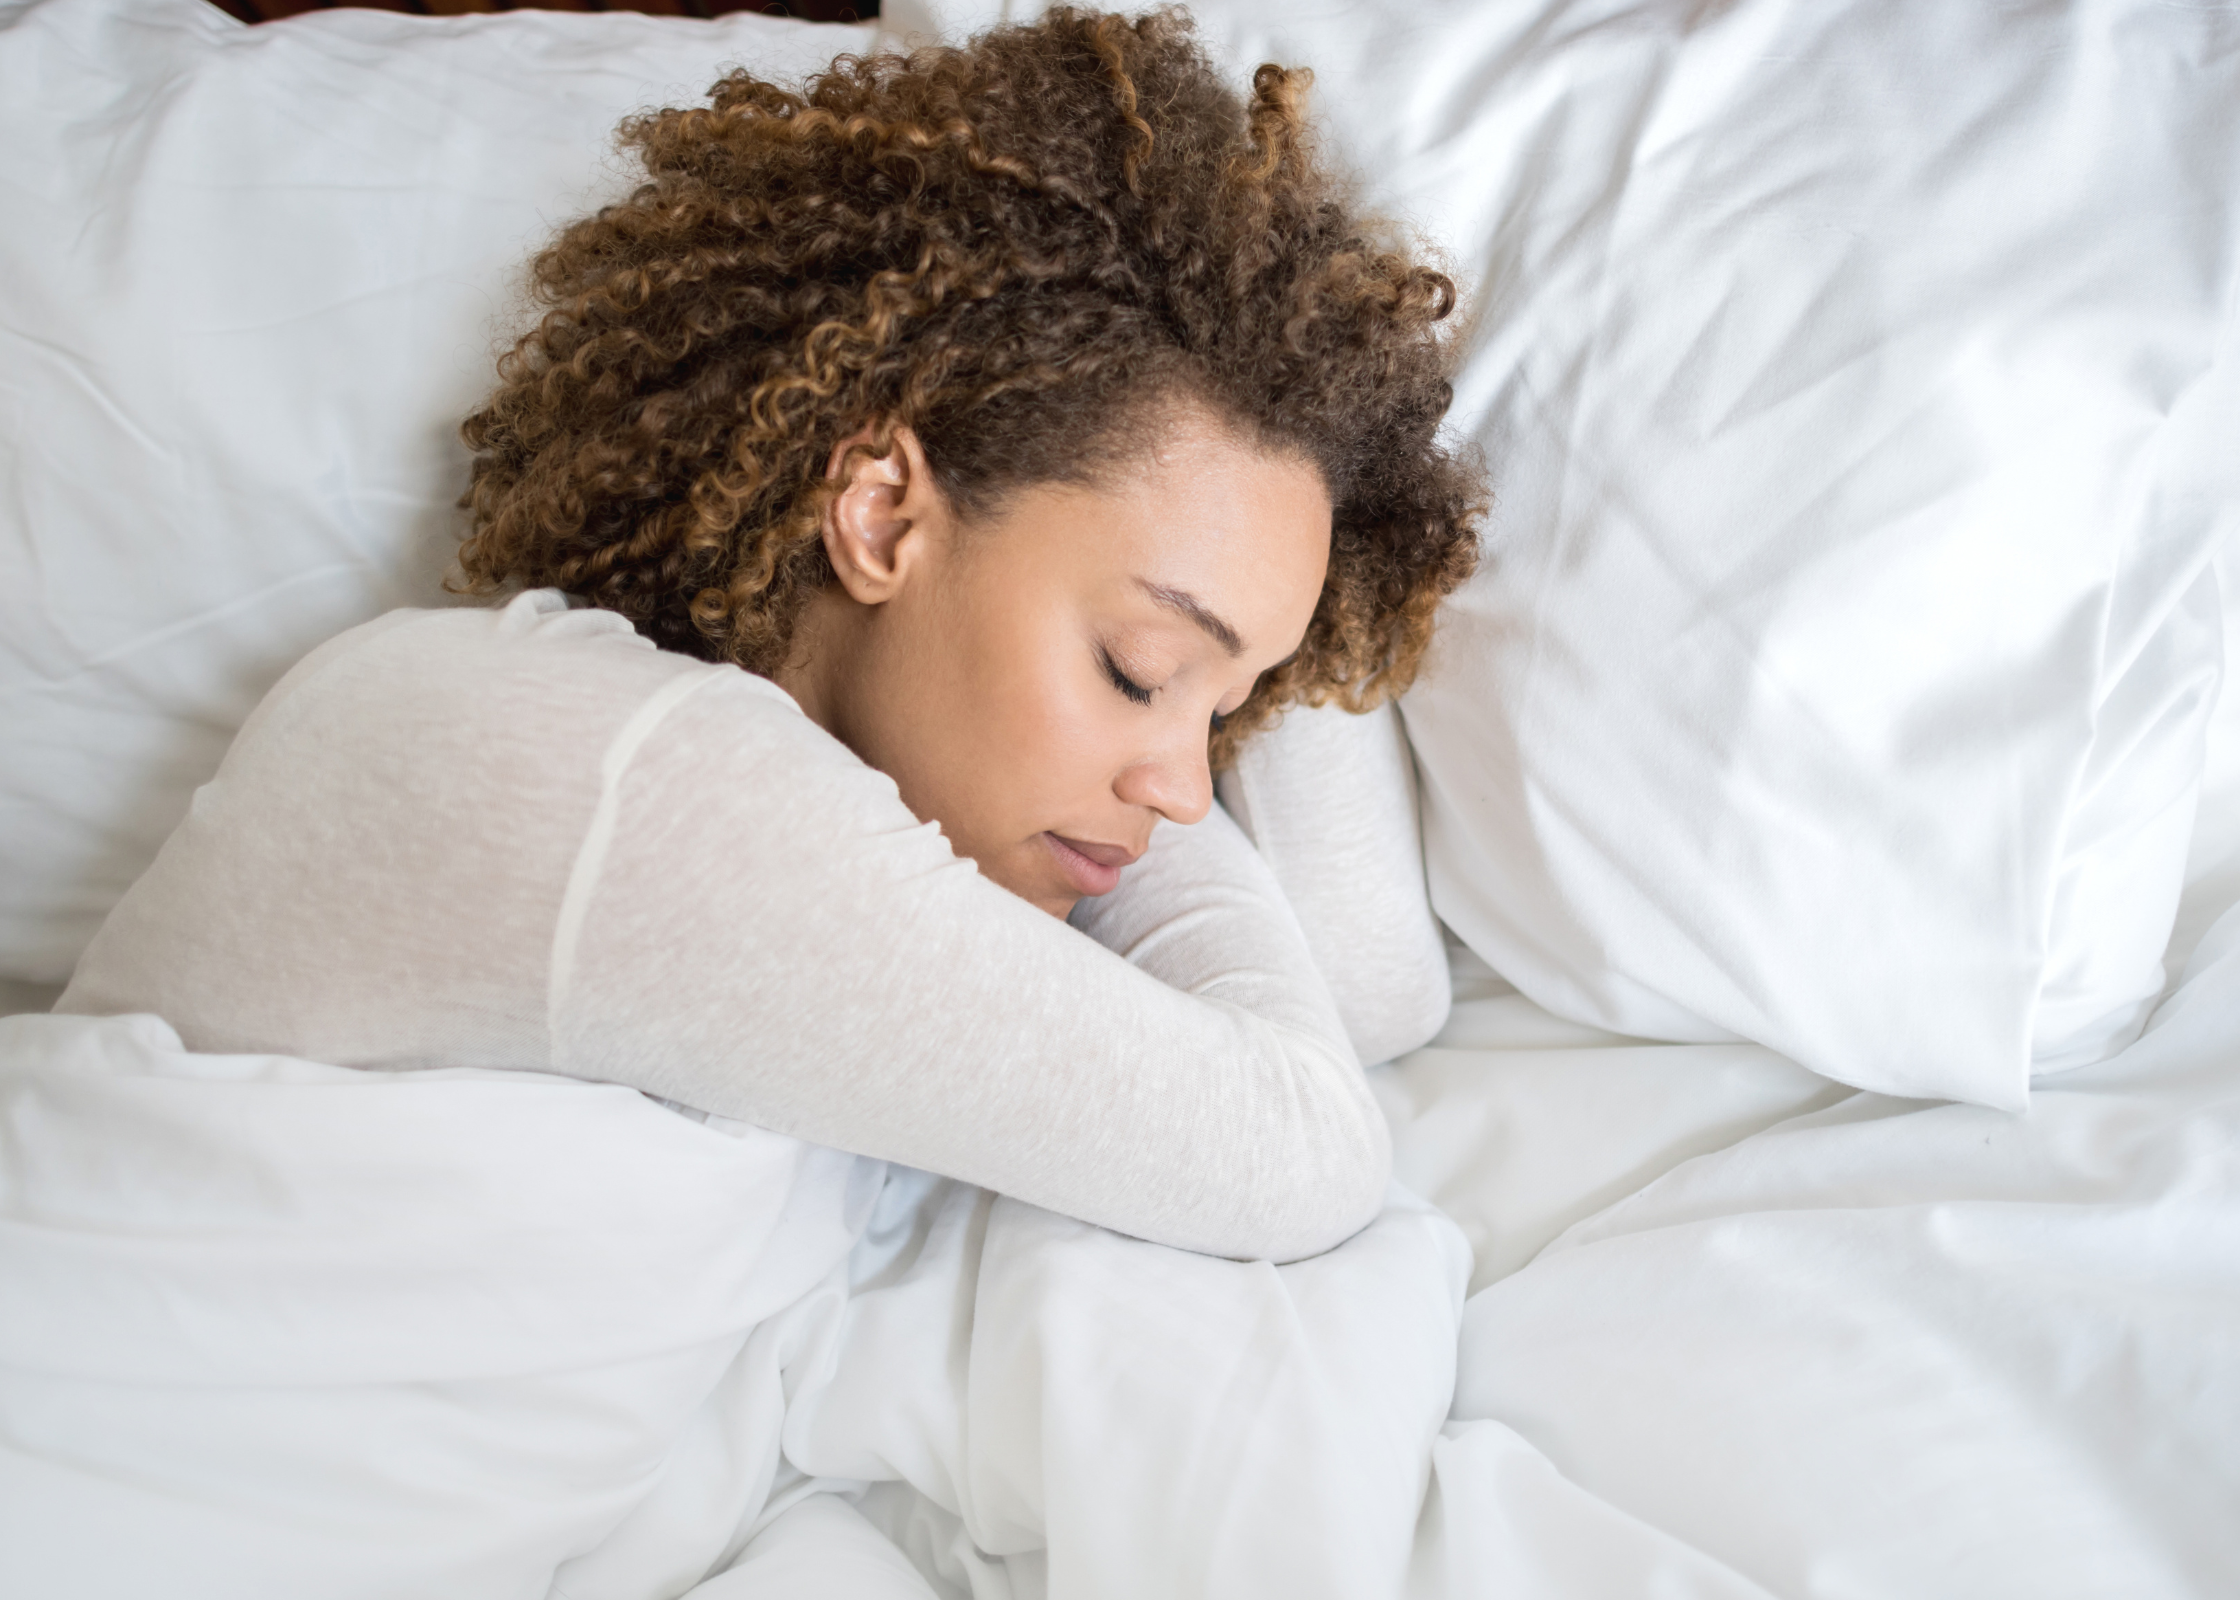 mixed race black woman with curly hair sleeping napping on white bedding and sheets. nighttime routine ideas. evening routine ritual. bedtime routine checklist. nighttime skincare routines. Tips for better sleep